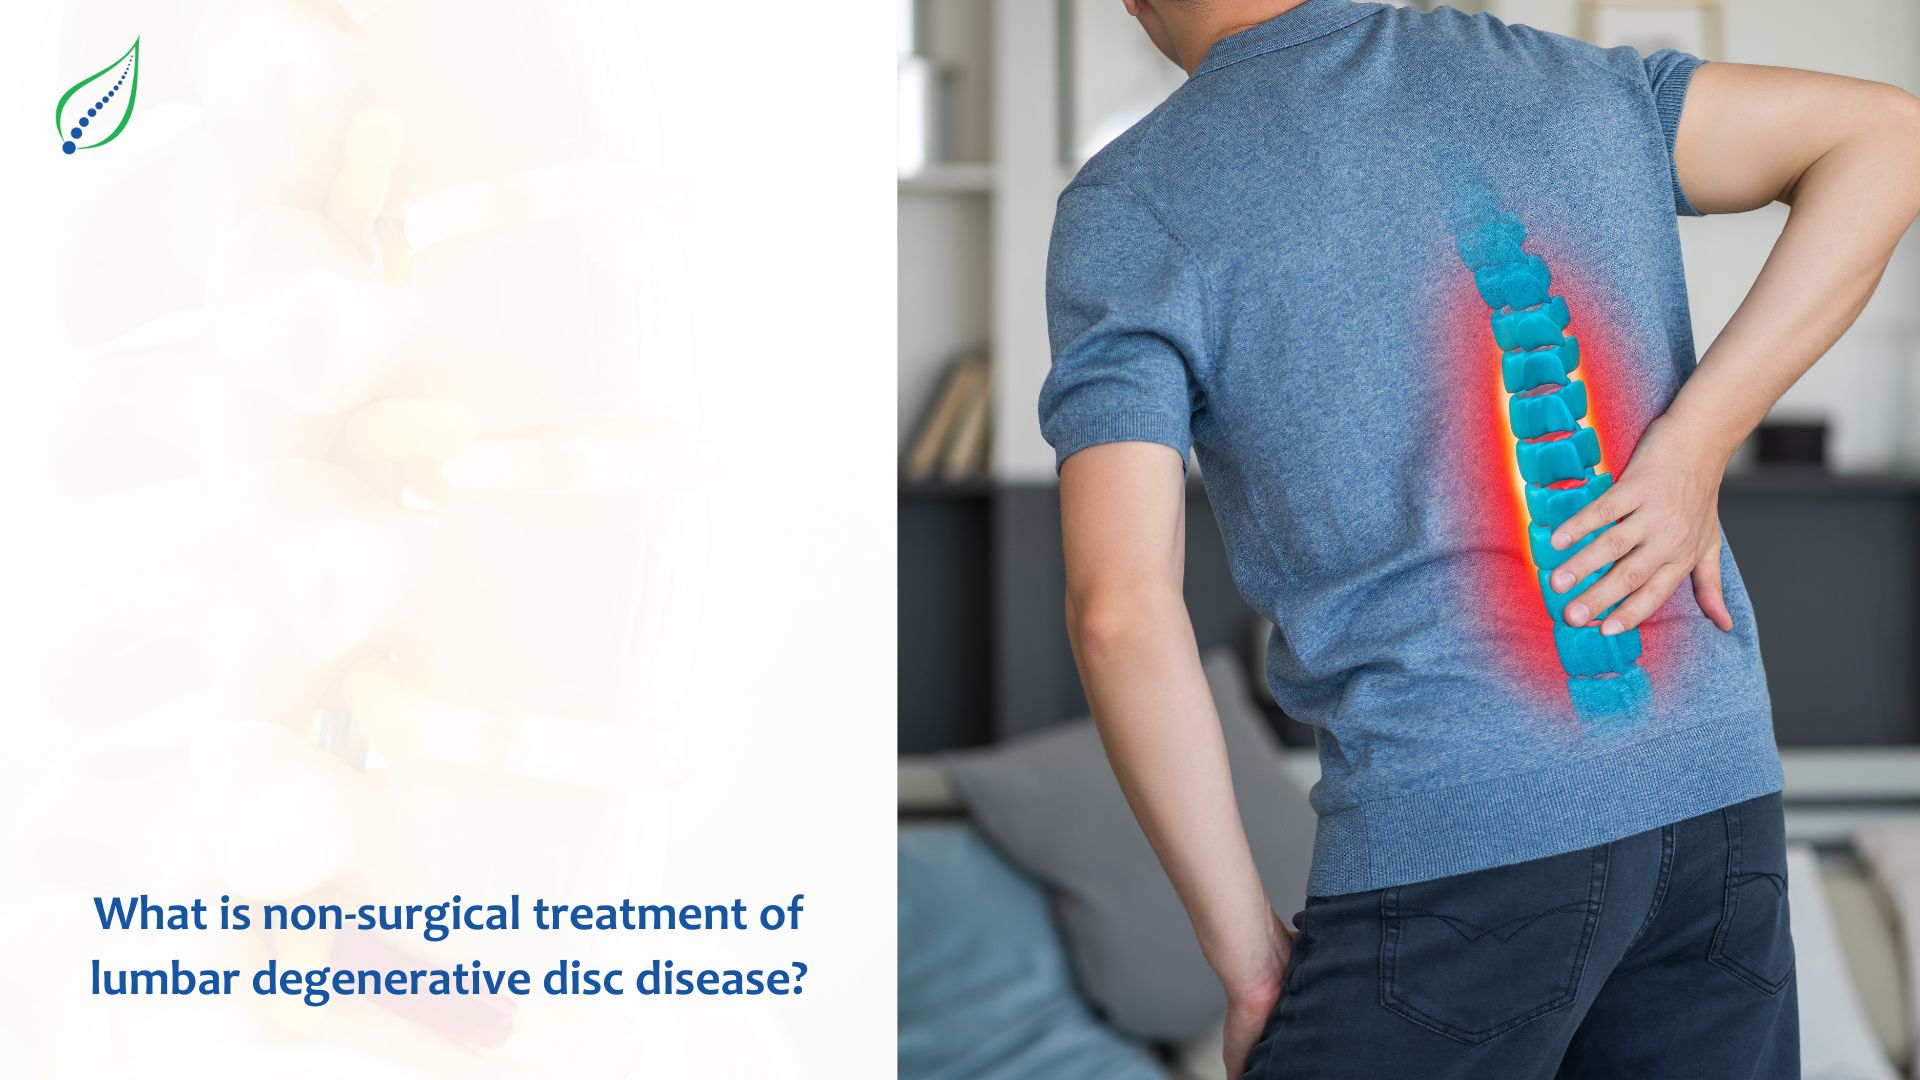 What is Non-Surgical Treatment Of Lumbar Degenerative Disc Disease?